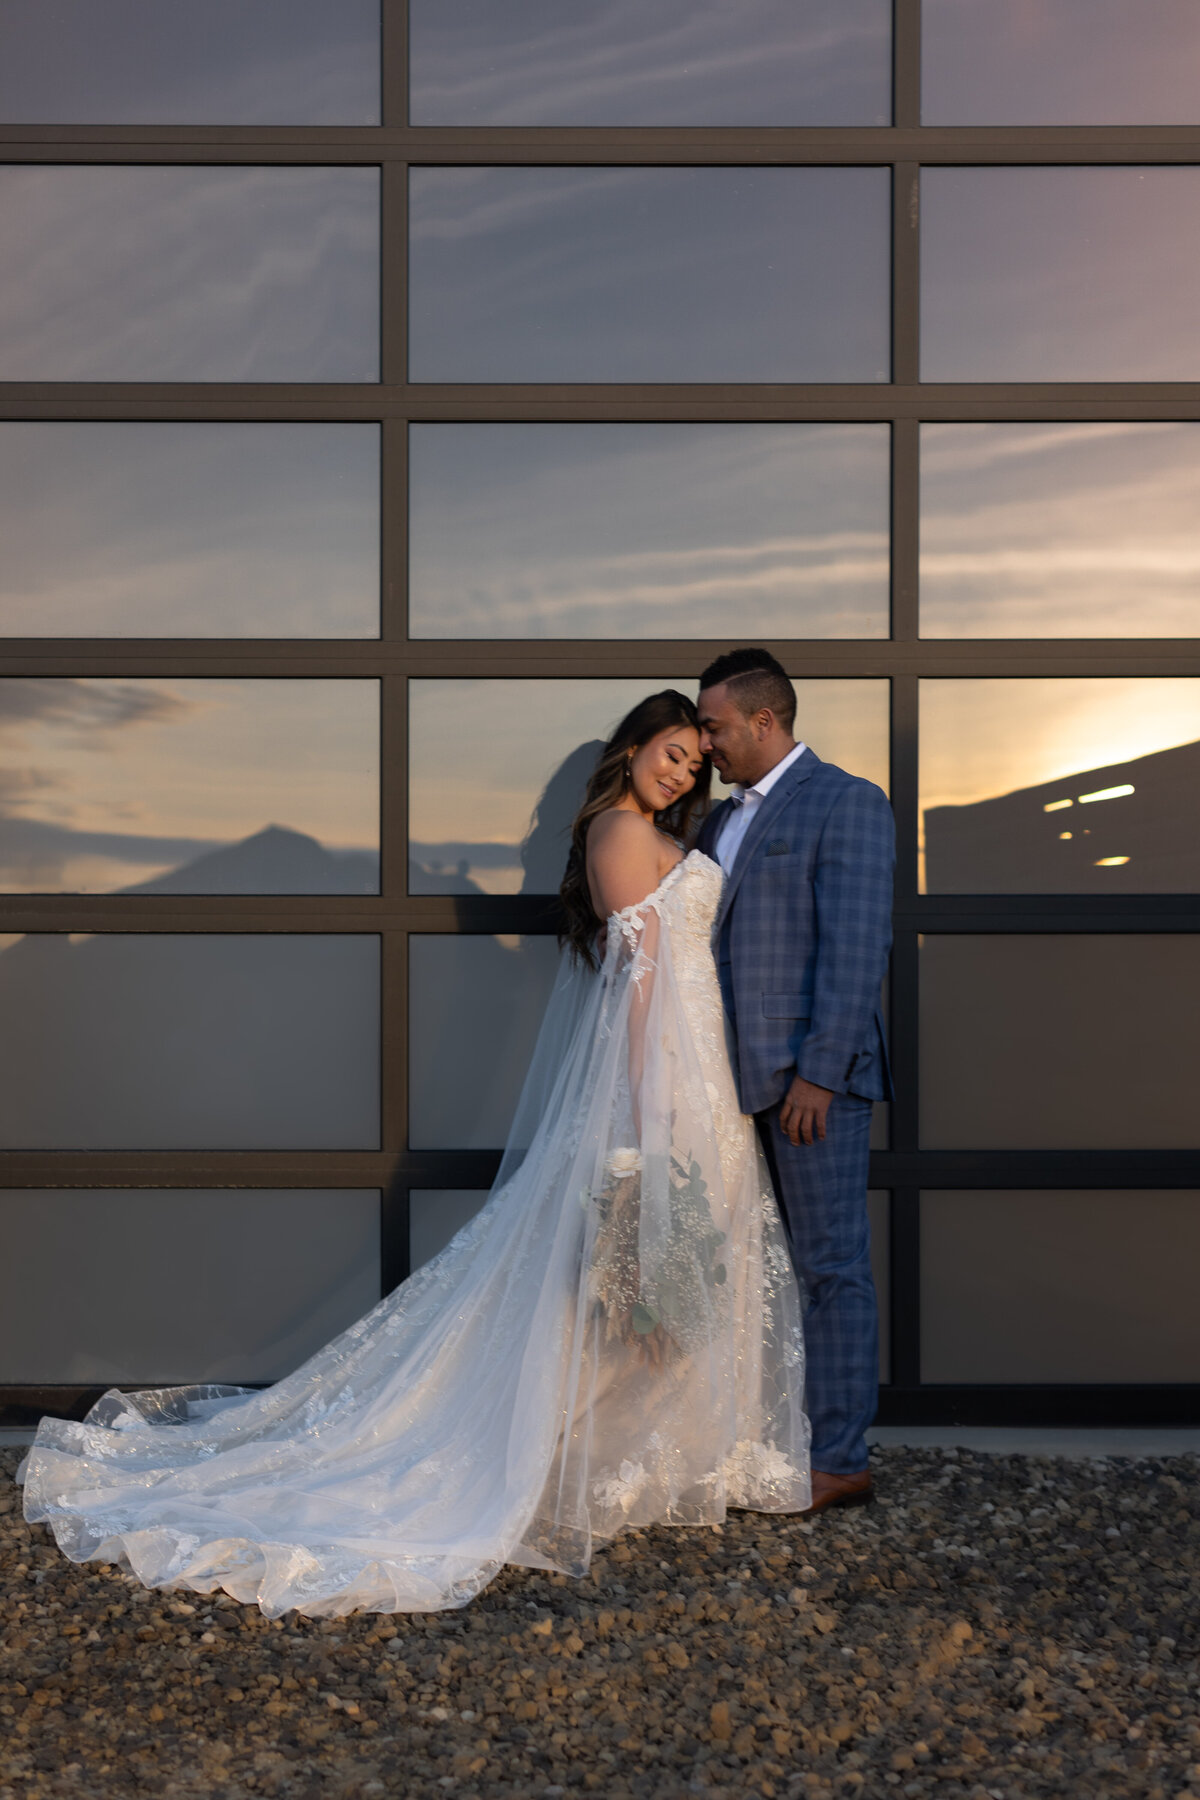 She's facing camera and he's looking at her in front of white barn glass door with incredible sunset reflection.